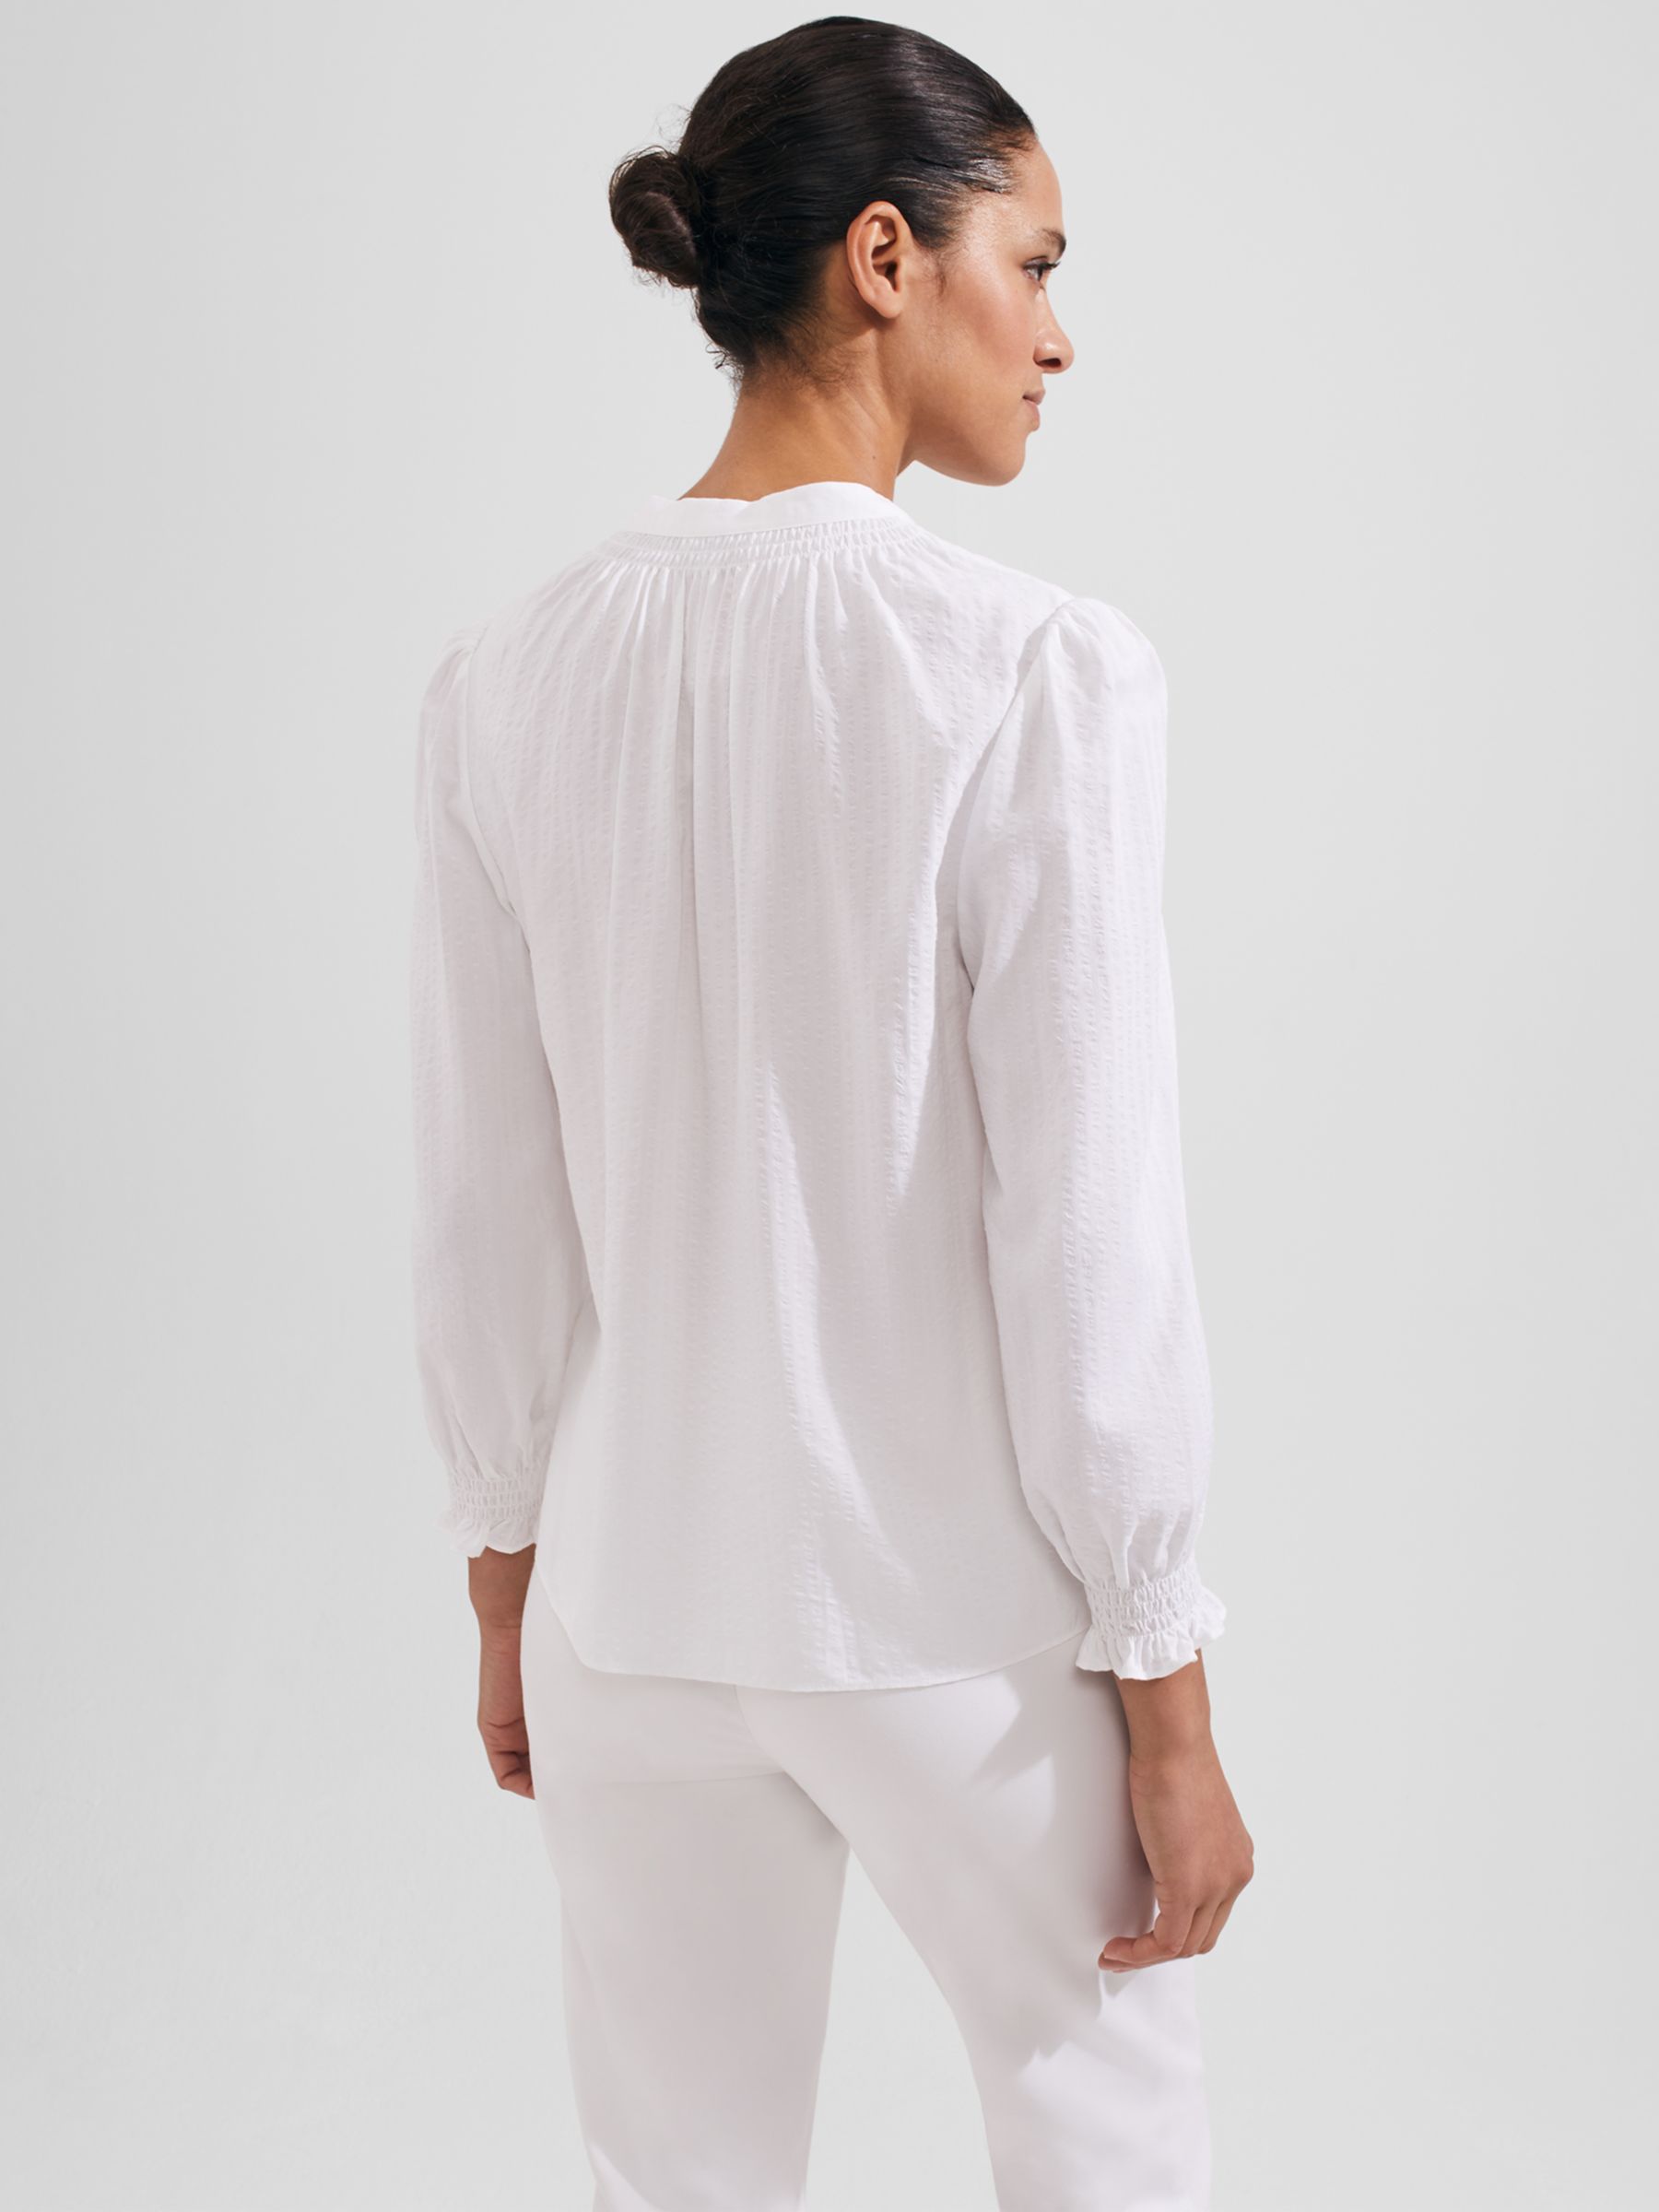 Buy Hobbs Constance Cotton Blend Top, White Online at johnlewis.com